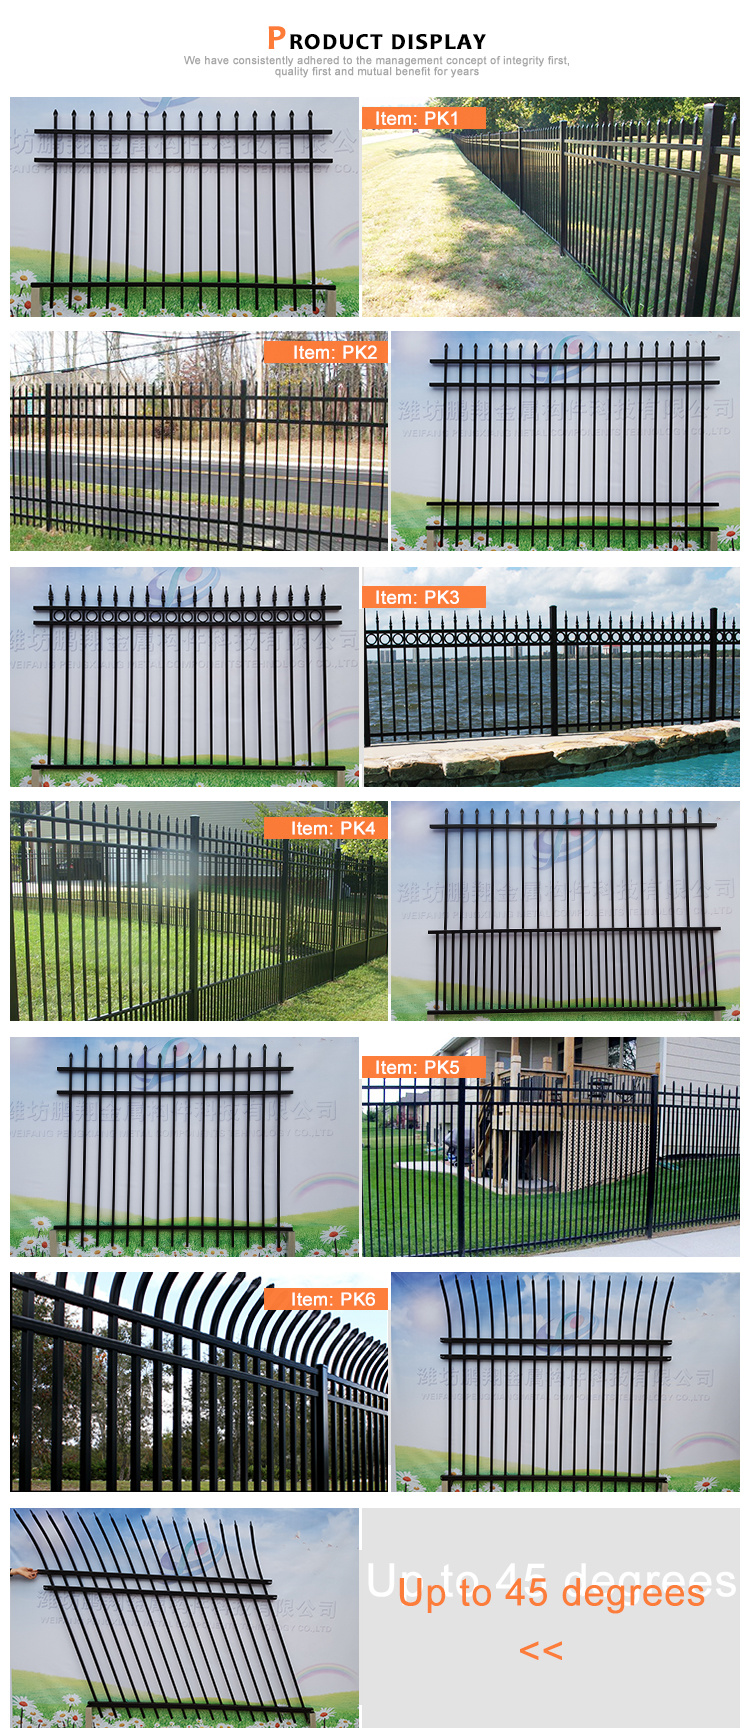 Aluminium Fencing Picket Fence Flat Fence Loop Top Fence